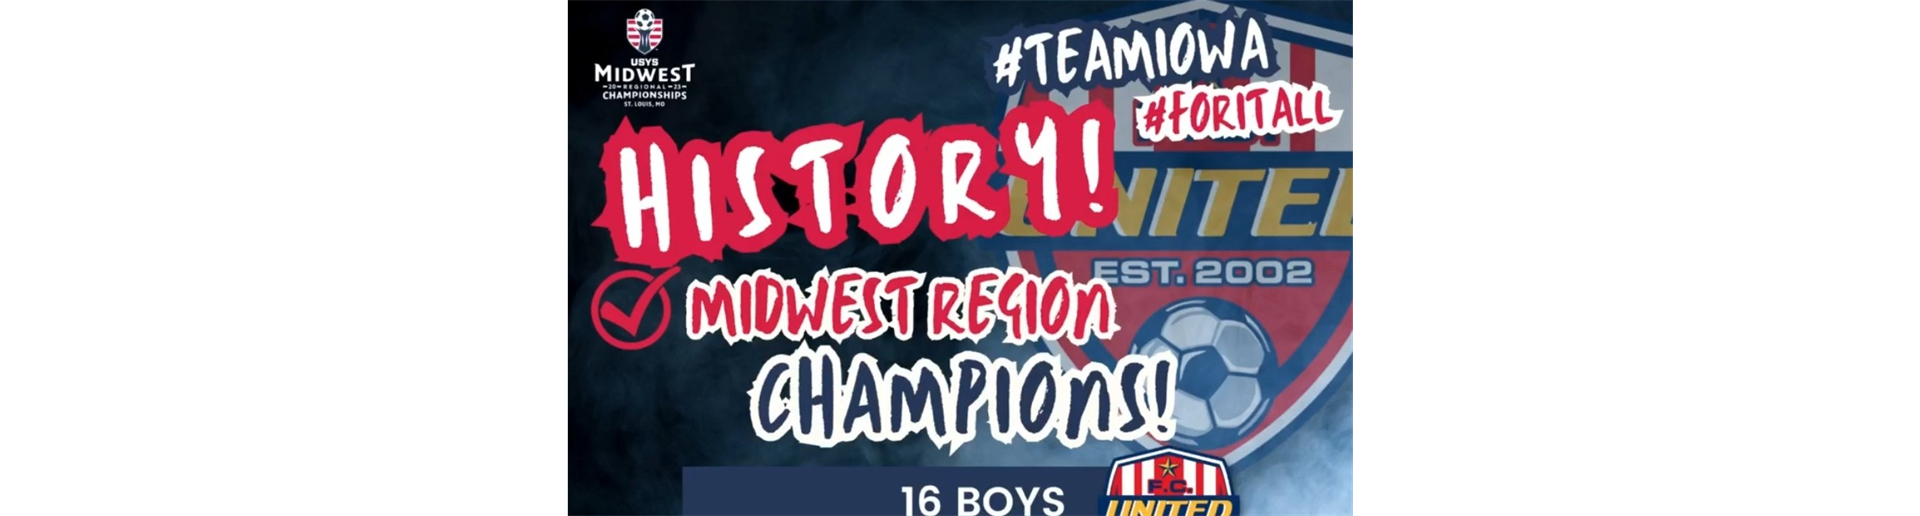 History!  First team from Iowa to win USYS Region 2 Championships